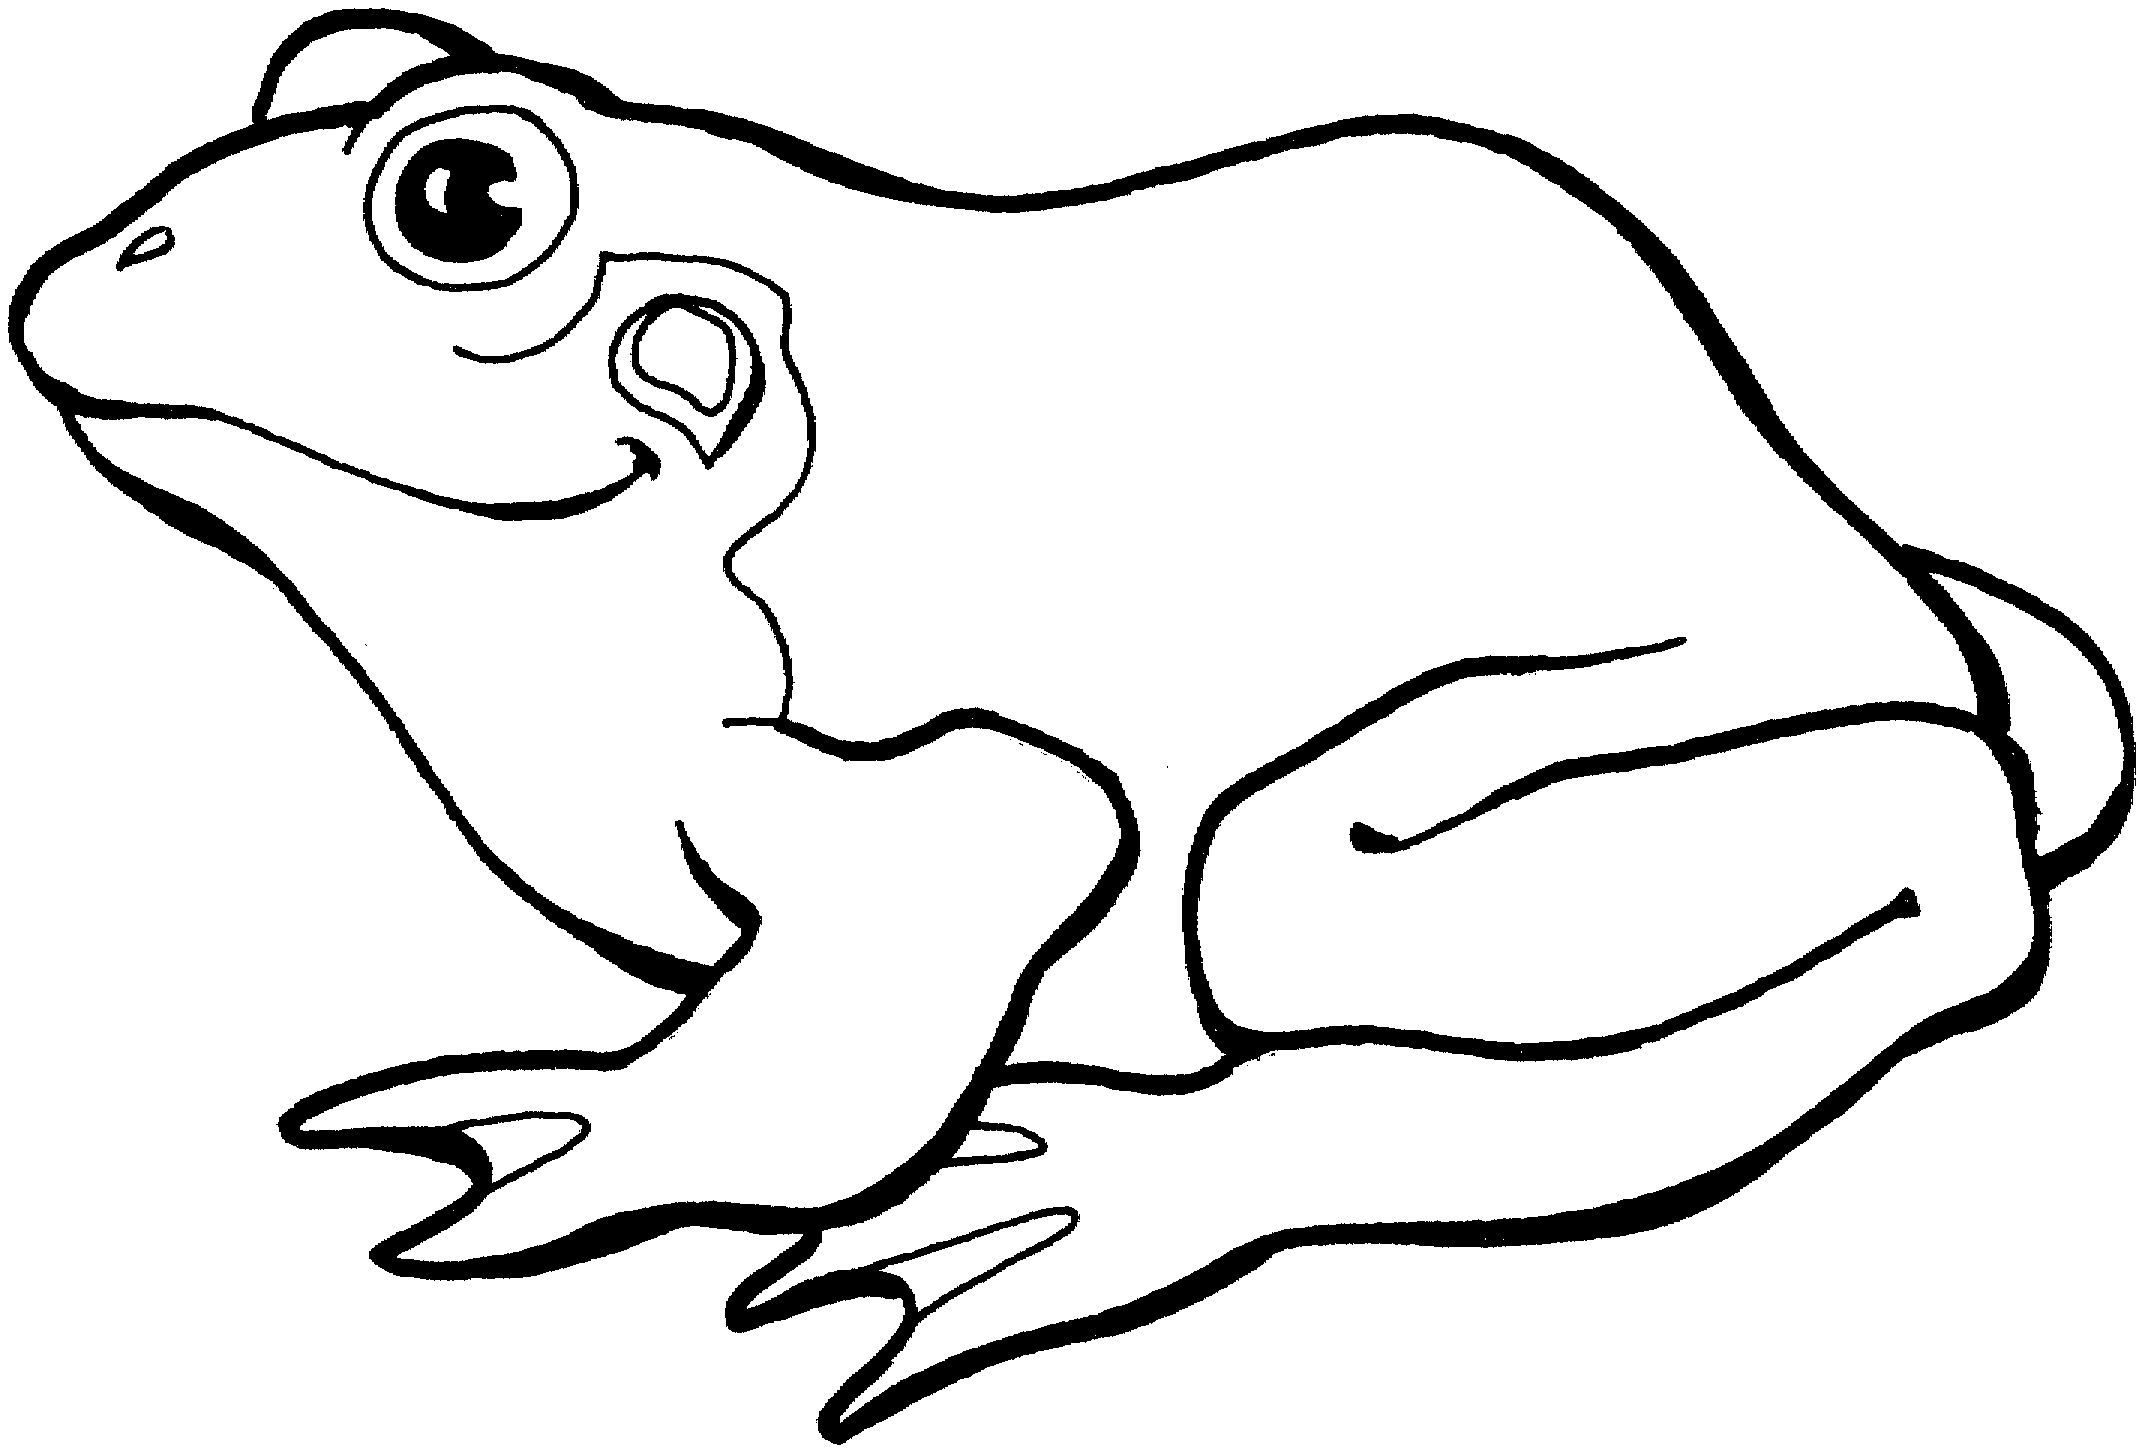 Free Black And White Clip Art Frog, Download Free Clip Art.